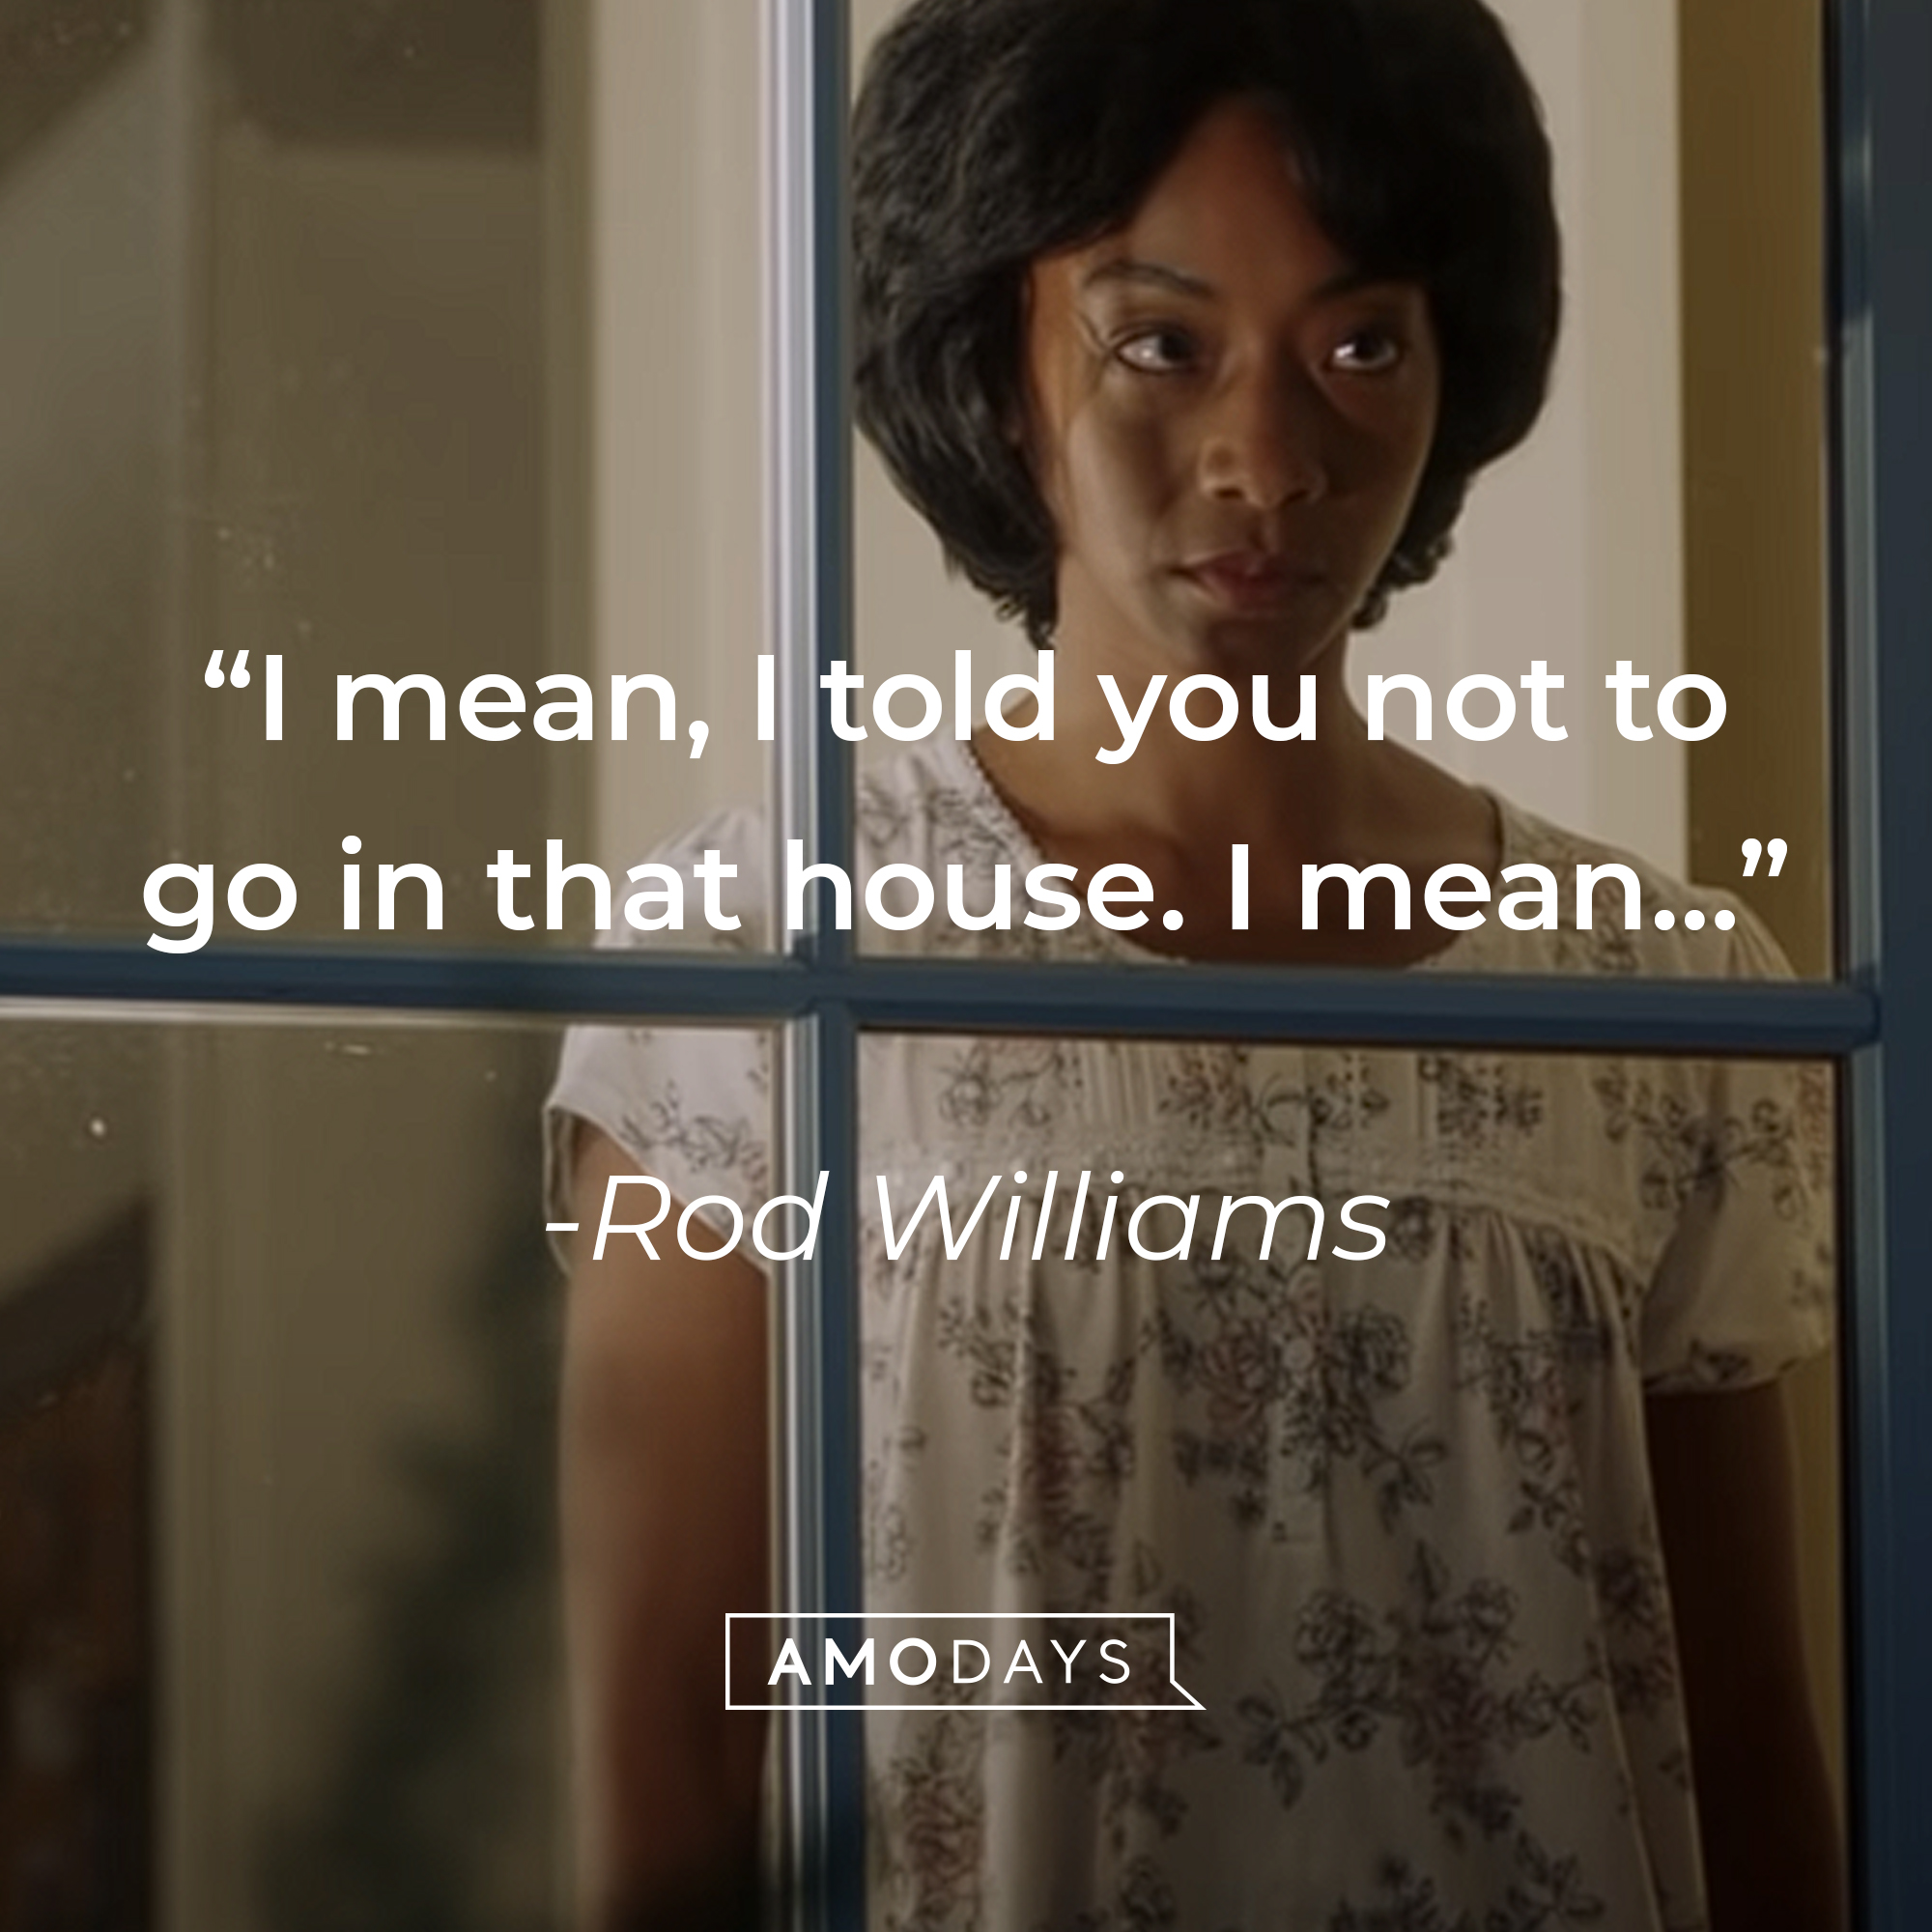 An image of a woman with Rod Williams’s quote: “I mean, I told you not to go in that house. I mean…” | Source: youtube.com/UniversalpicturesIta